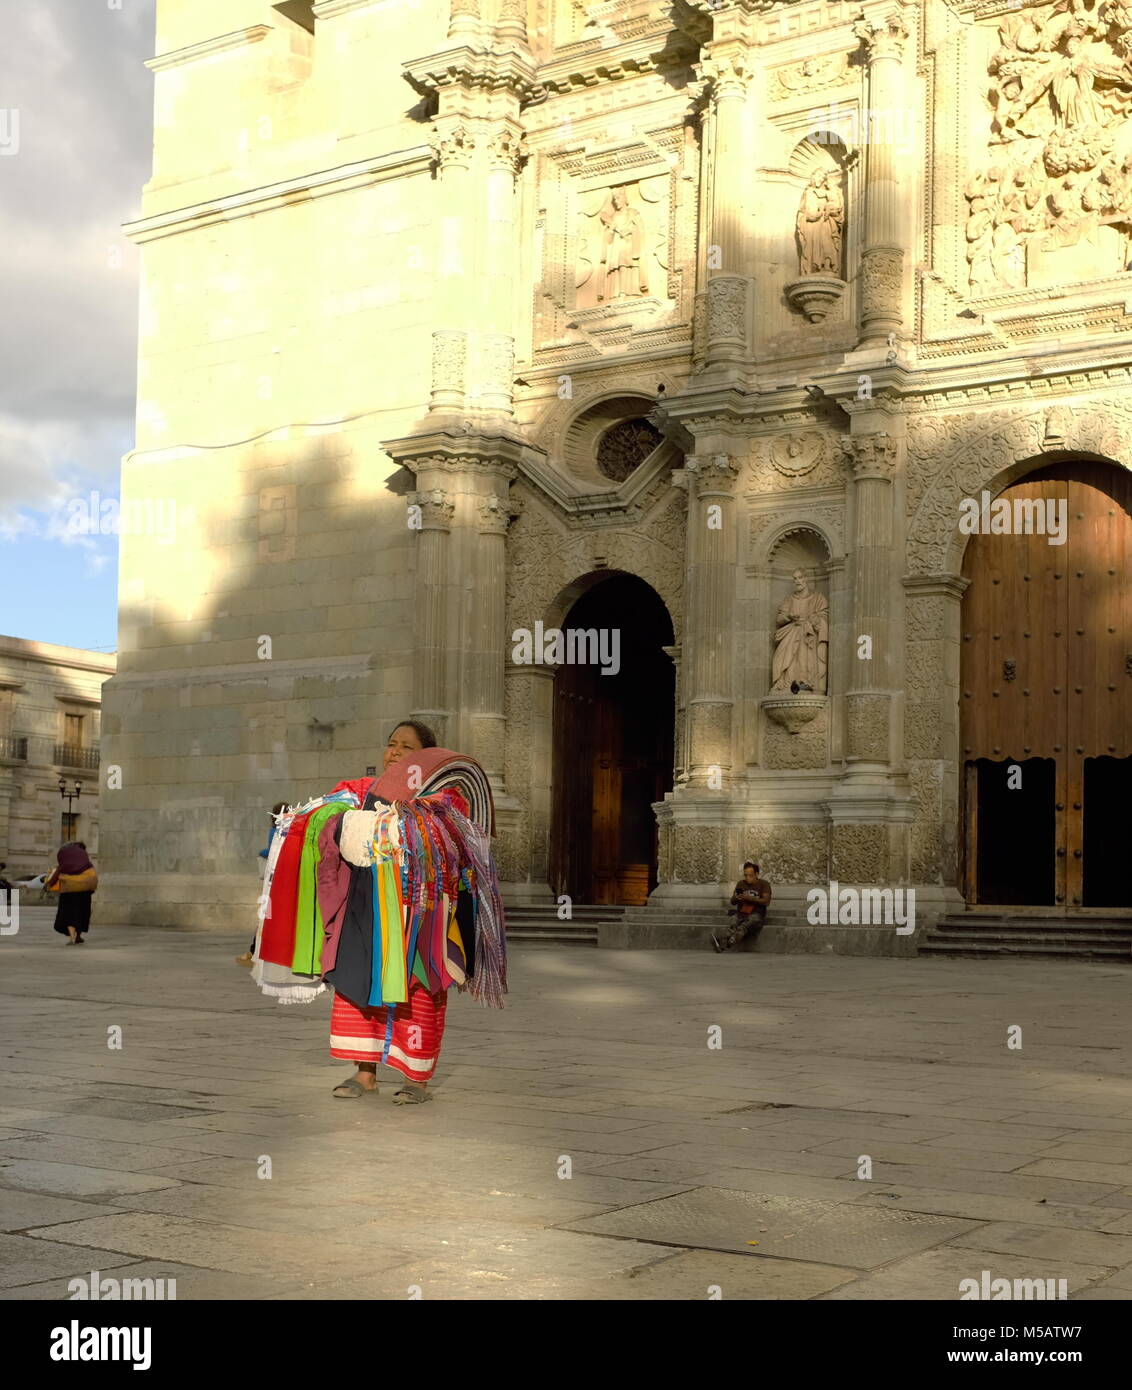 The sun sets majestically on a woman standing stoically in front of the Cathedral of Our Lady of the Assumption in Oaxaca, Mexico. Stock Photo